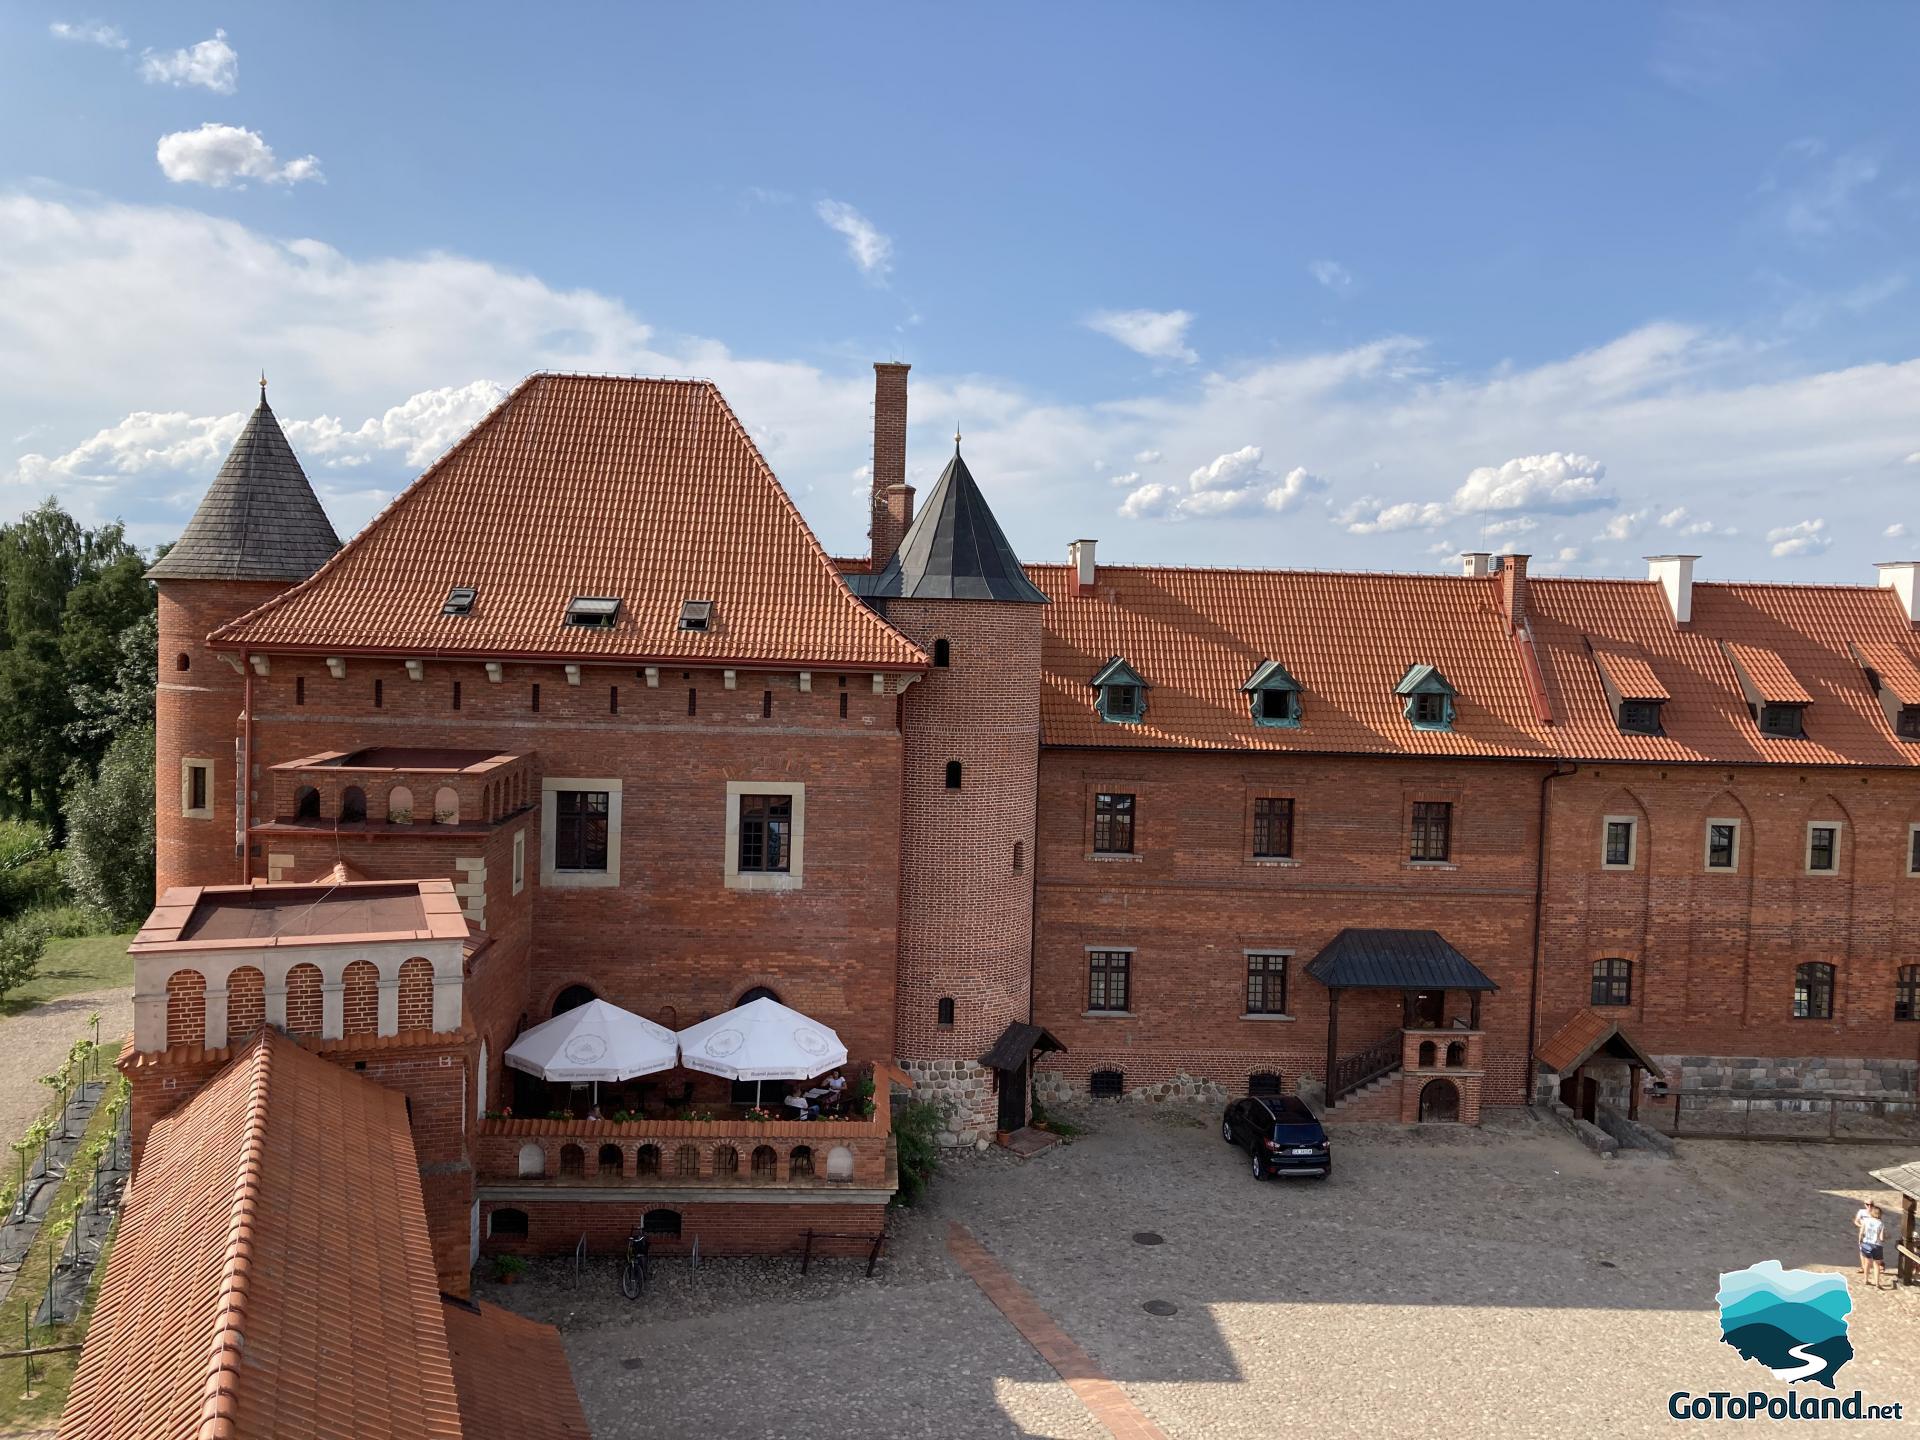 another view of a castle made of red bricks